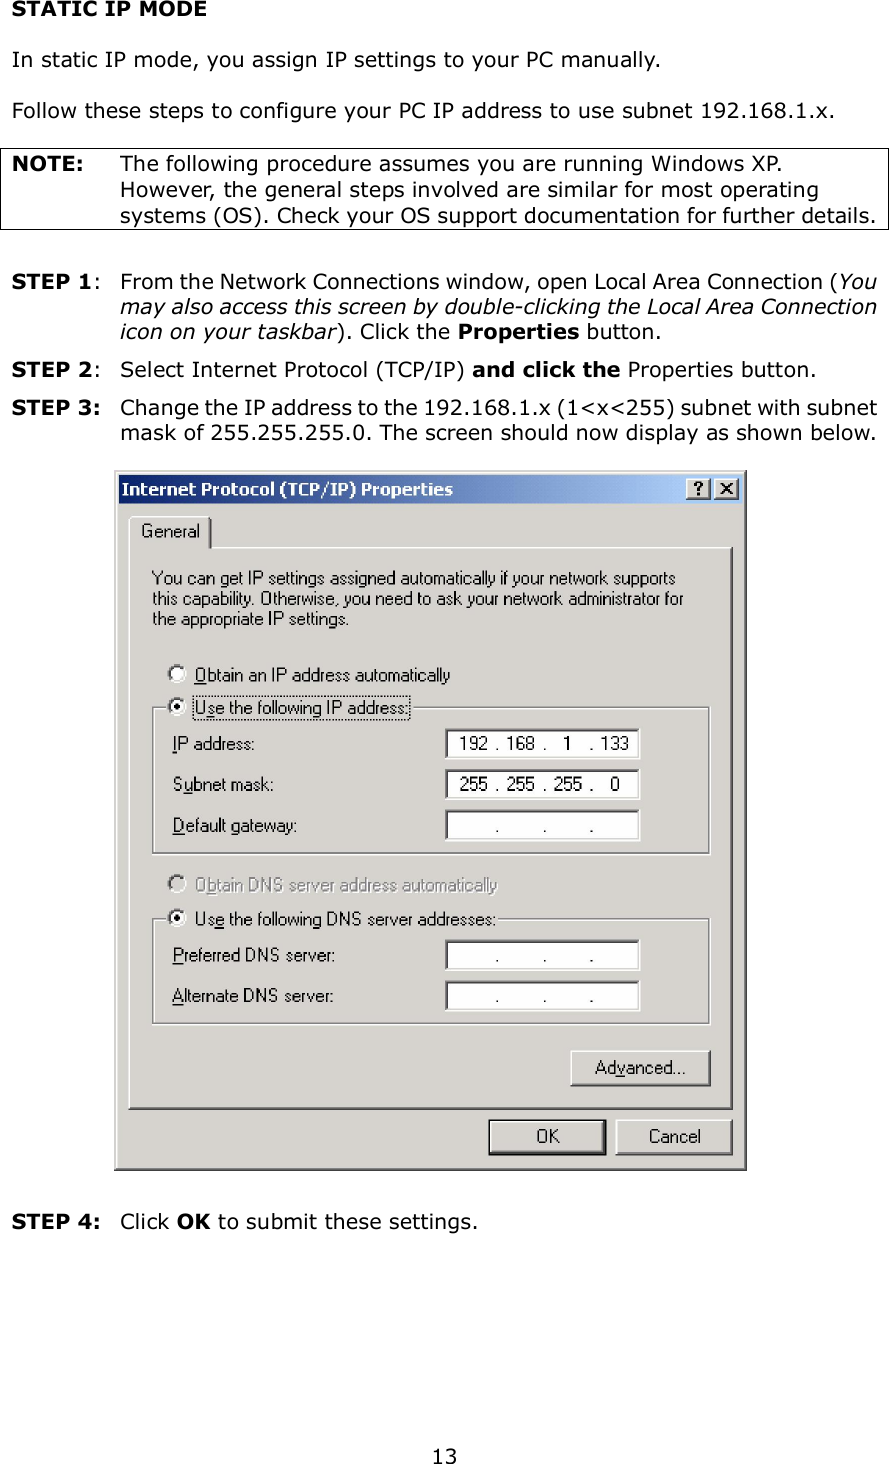  13 STATIC IP MODE  In static IP mode, you assign IP settings to your PC manually.  Follow these steps to configure your PC IP address to use subnet 192.168.1.x.  NOTE:  The following procedure assumes you are running Windows XP.   However, the general steps involved are similar for most operating systems (OS). Check your OS support documentation for further details.  STEP 1:  From the Network Connections window, open Local Area Connection (You may also access this screen by double-clicking the Local Area Connection icon on your taskbar). Click the Properties button. STEP 2:  Select Internet Protocol (TCP/IP) and click the Properties button. STEP 3:  Change the IP address to the 192.168.1.x (1&lt;x&lt;255) subnet with subnet mask of 255.255.255.0. The screen should now display as shown below.      STEP 4:    Click OK to submit these settings.  